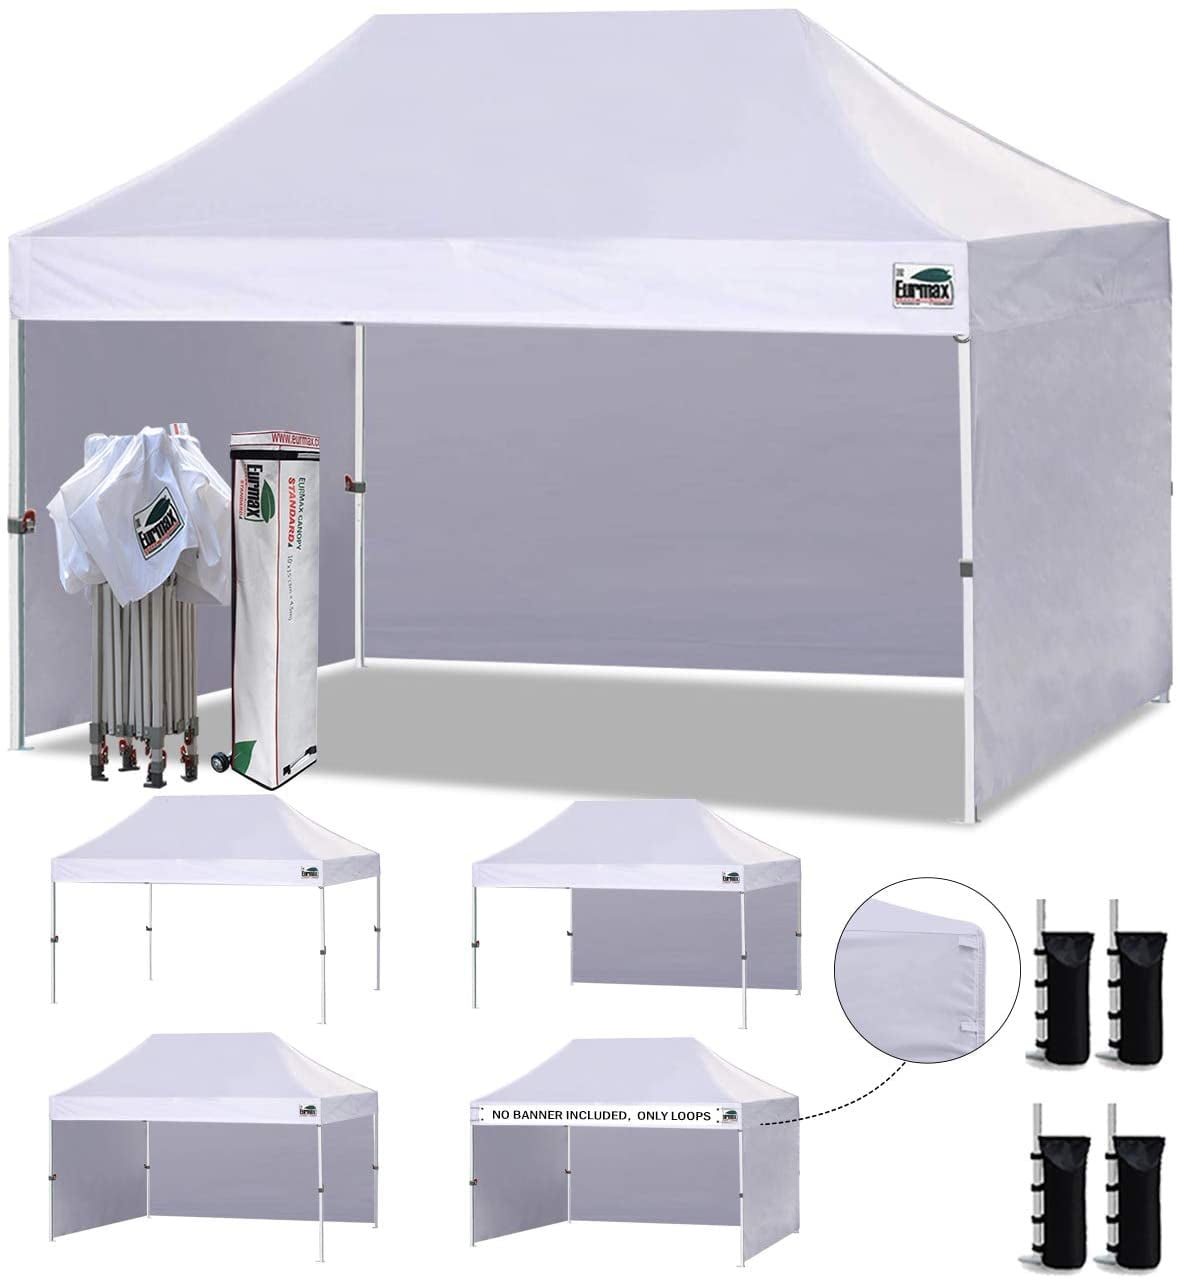 HEAVY DUTY 10X15 EZ Pop Up Canopy Outdoor Commercial Party Tent W/Roller Bag 